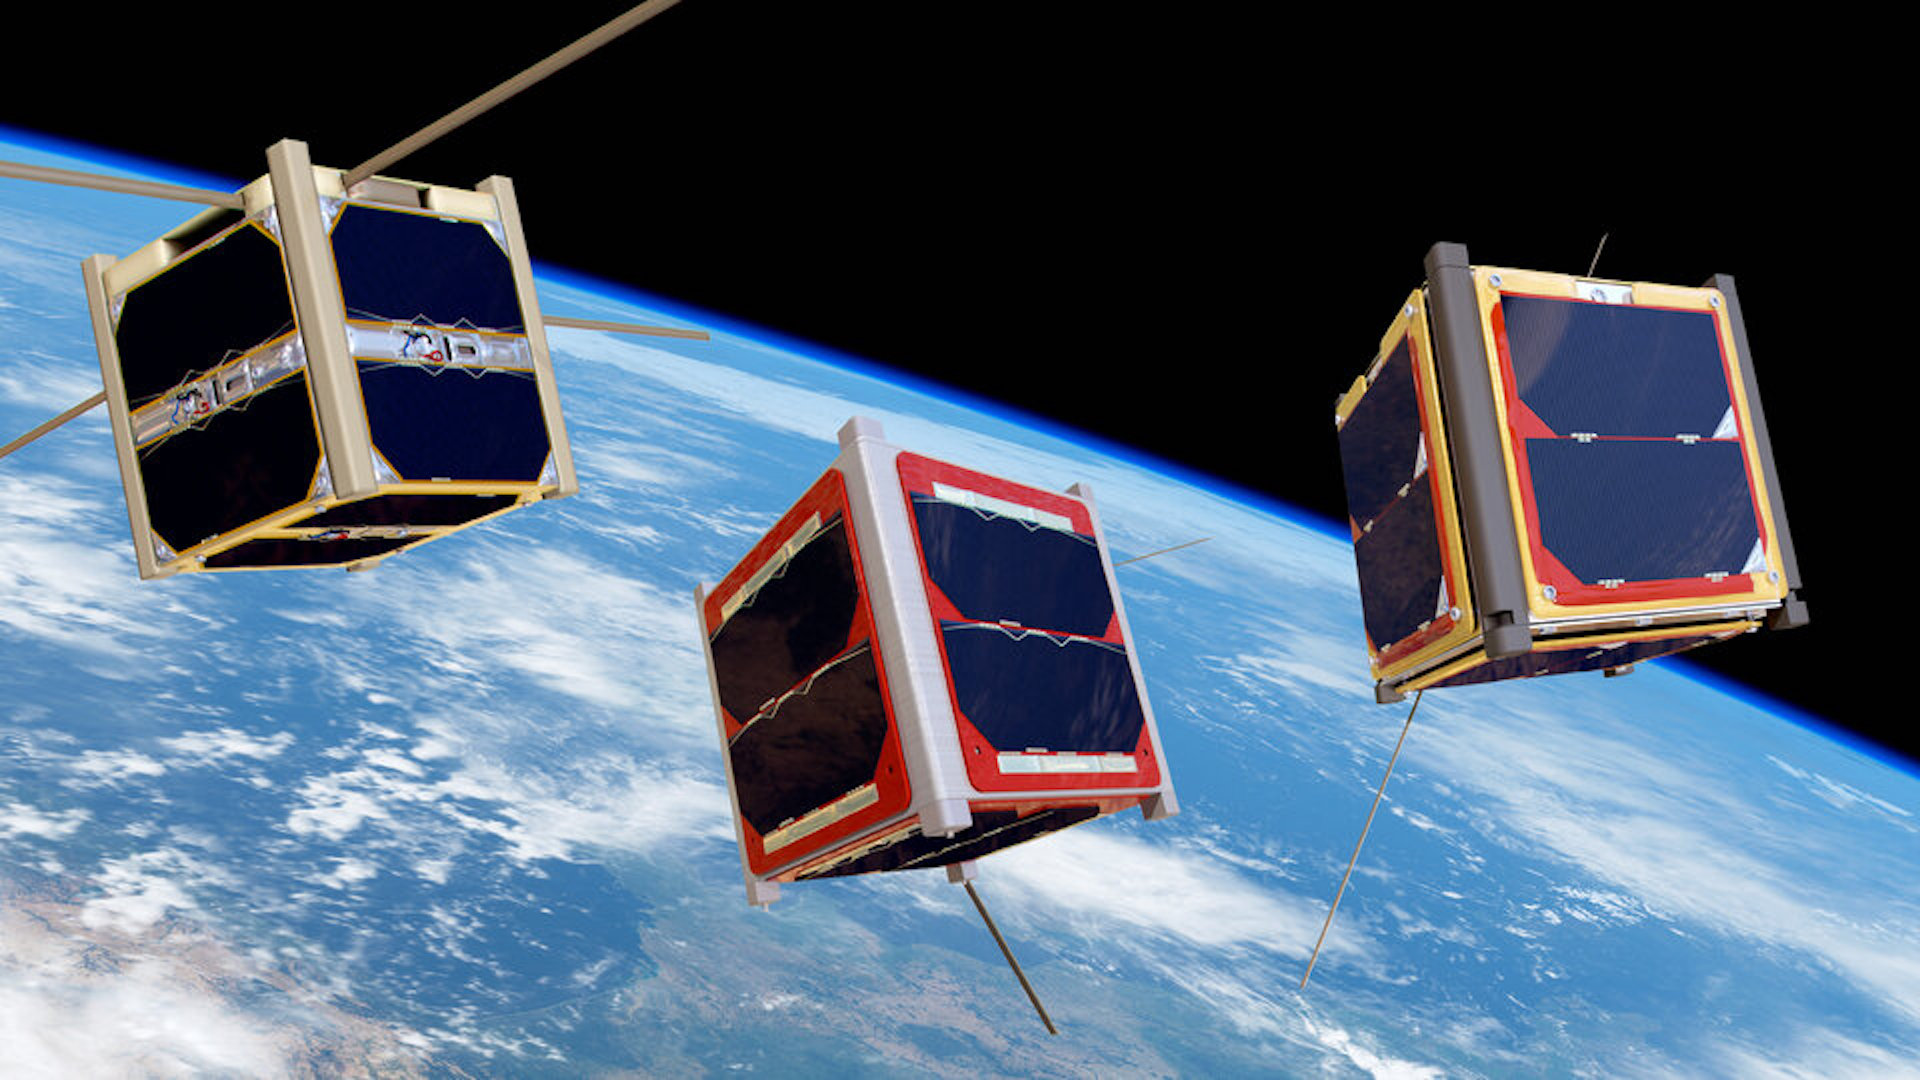 Call for Papers “CubeSats Applications for Earth and Prospectives for Planetary Remote Sensing”